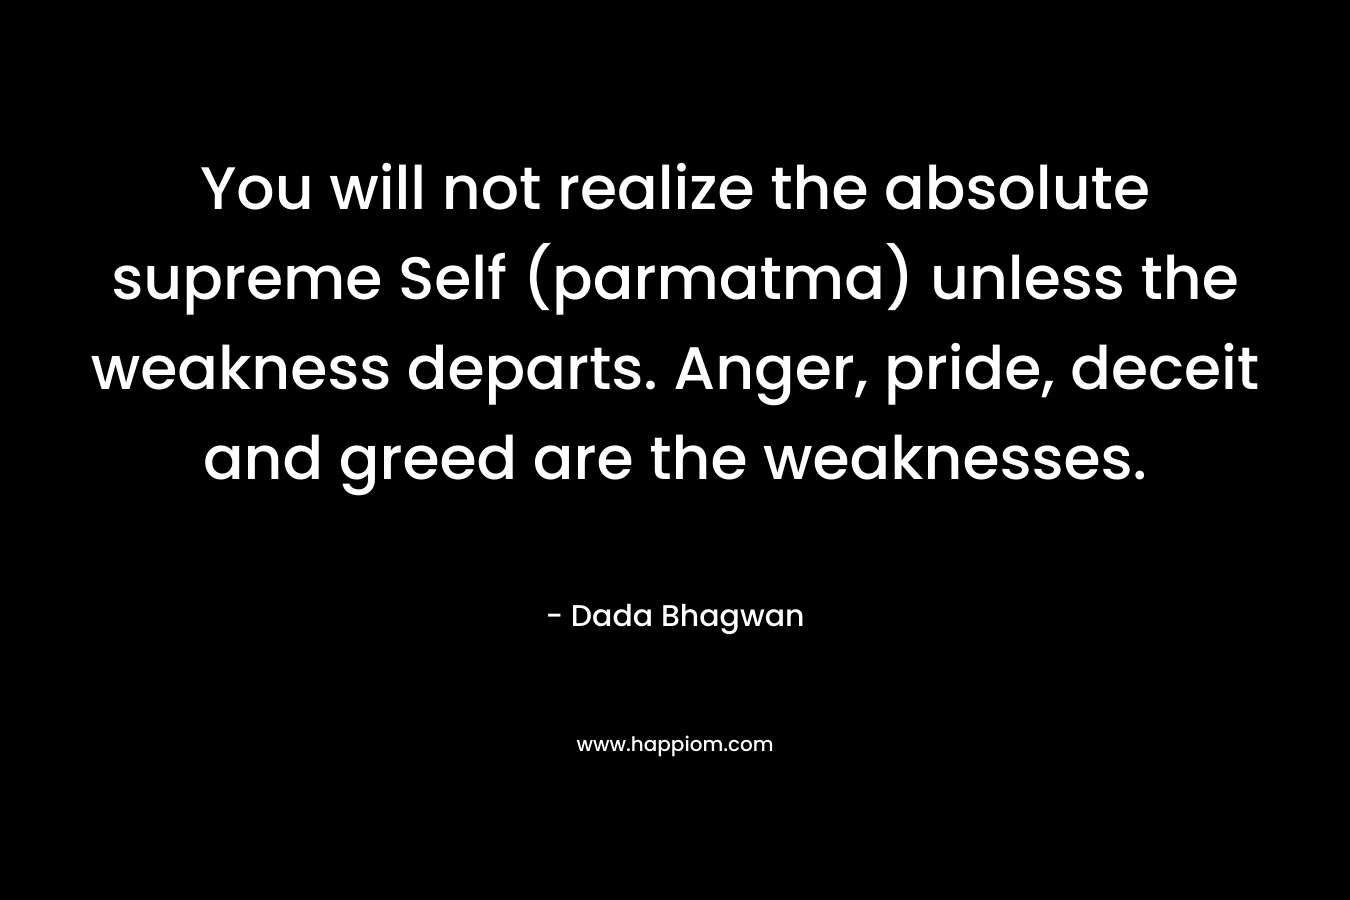 You will not realize the absolute supreme Self (parmatma) unless the weakness departs. Anger, pride, deceit and greed are the weaknesses. – Dada Bhagwan